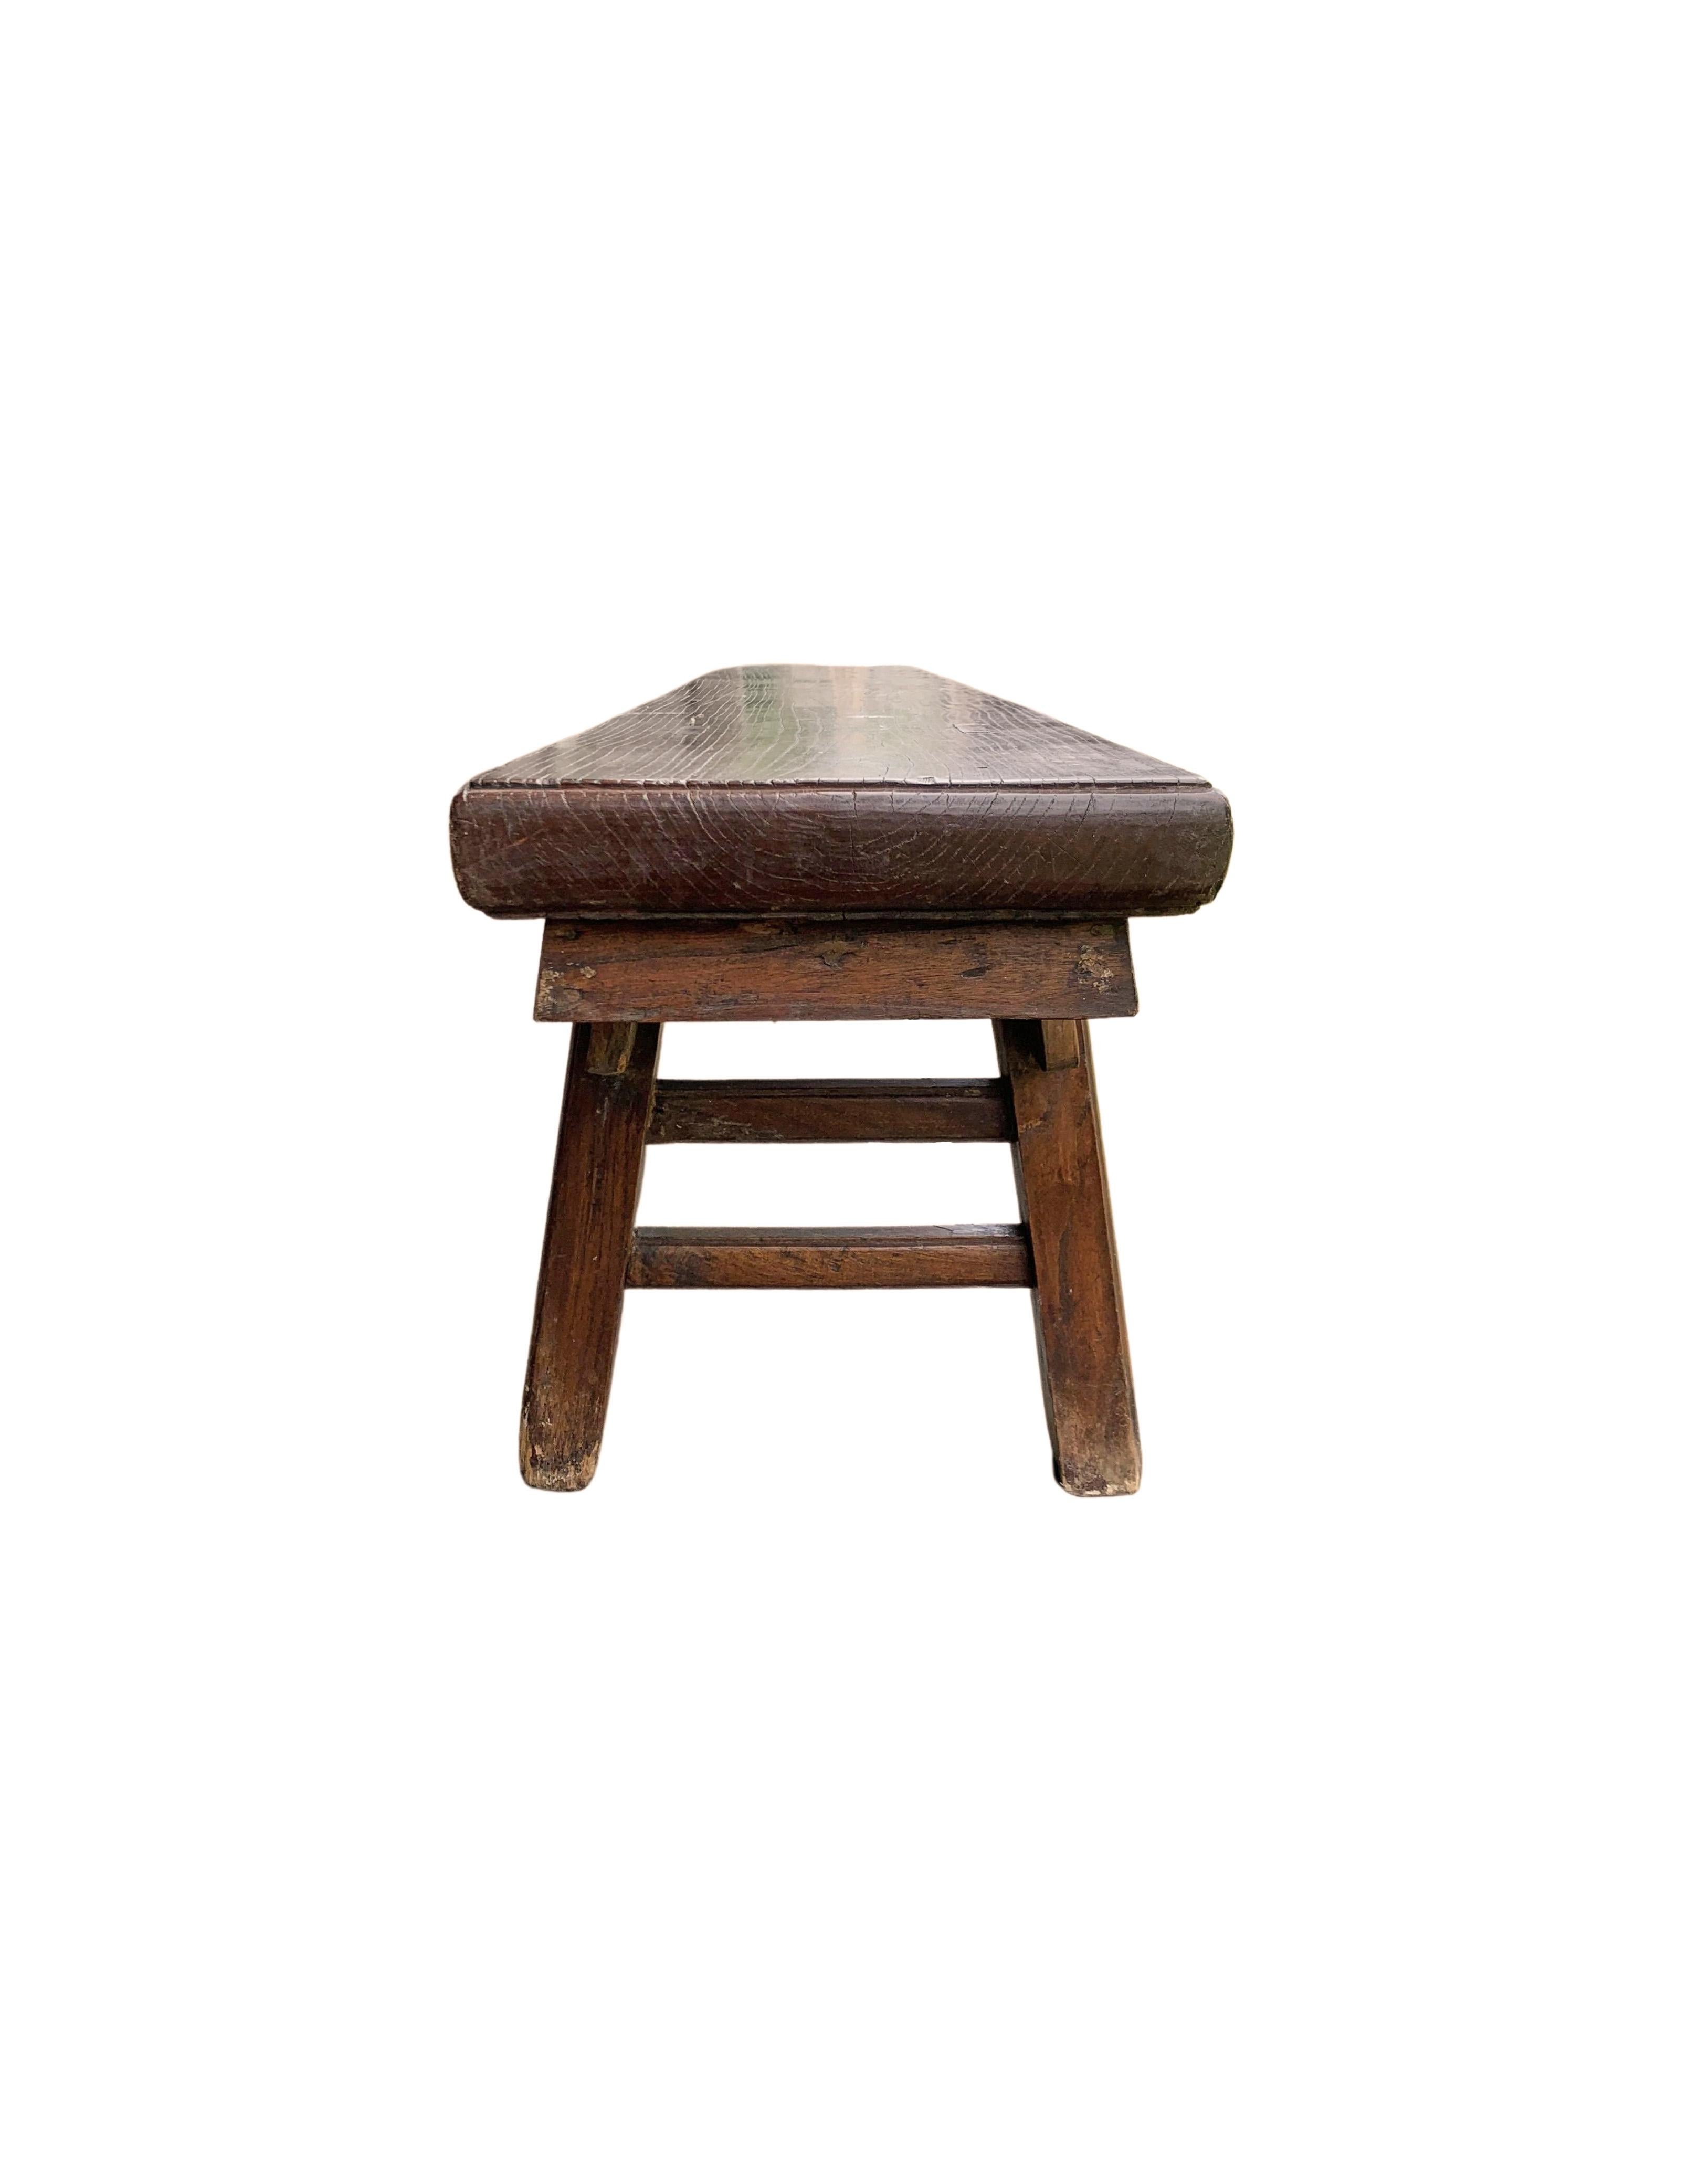 Chinese Elm Wood Three Person Long Bench, Qing Dynasty 1